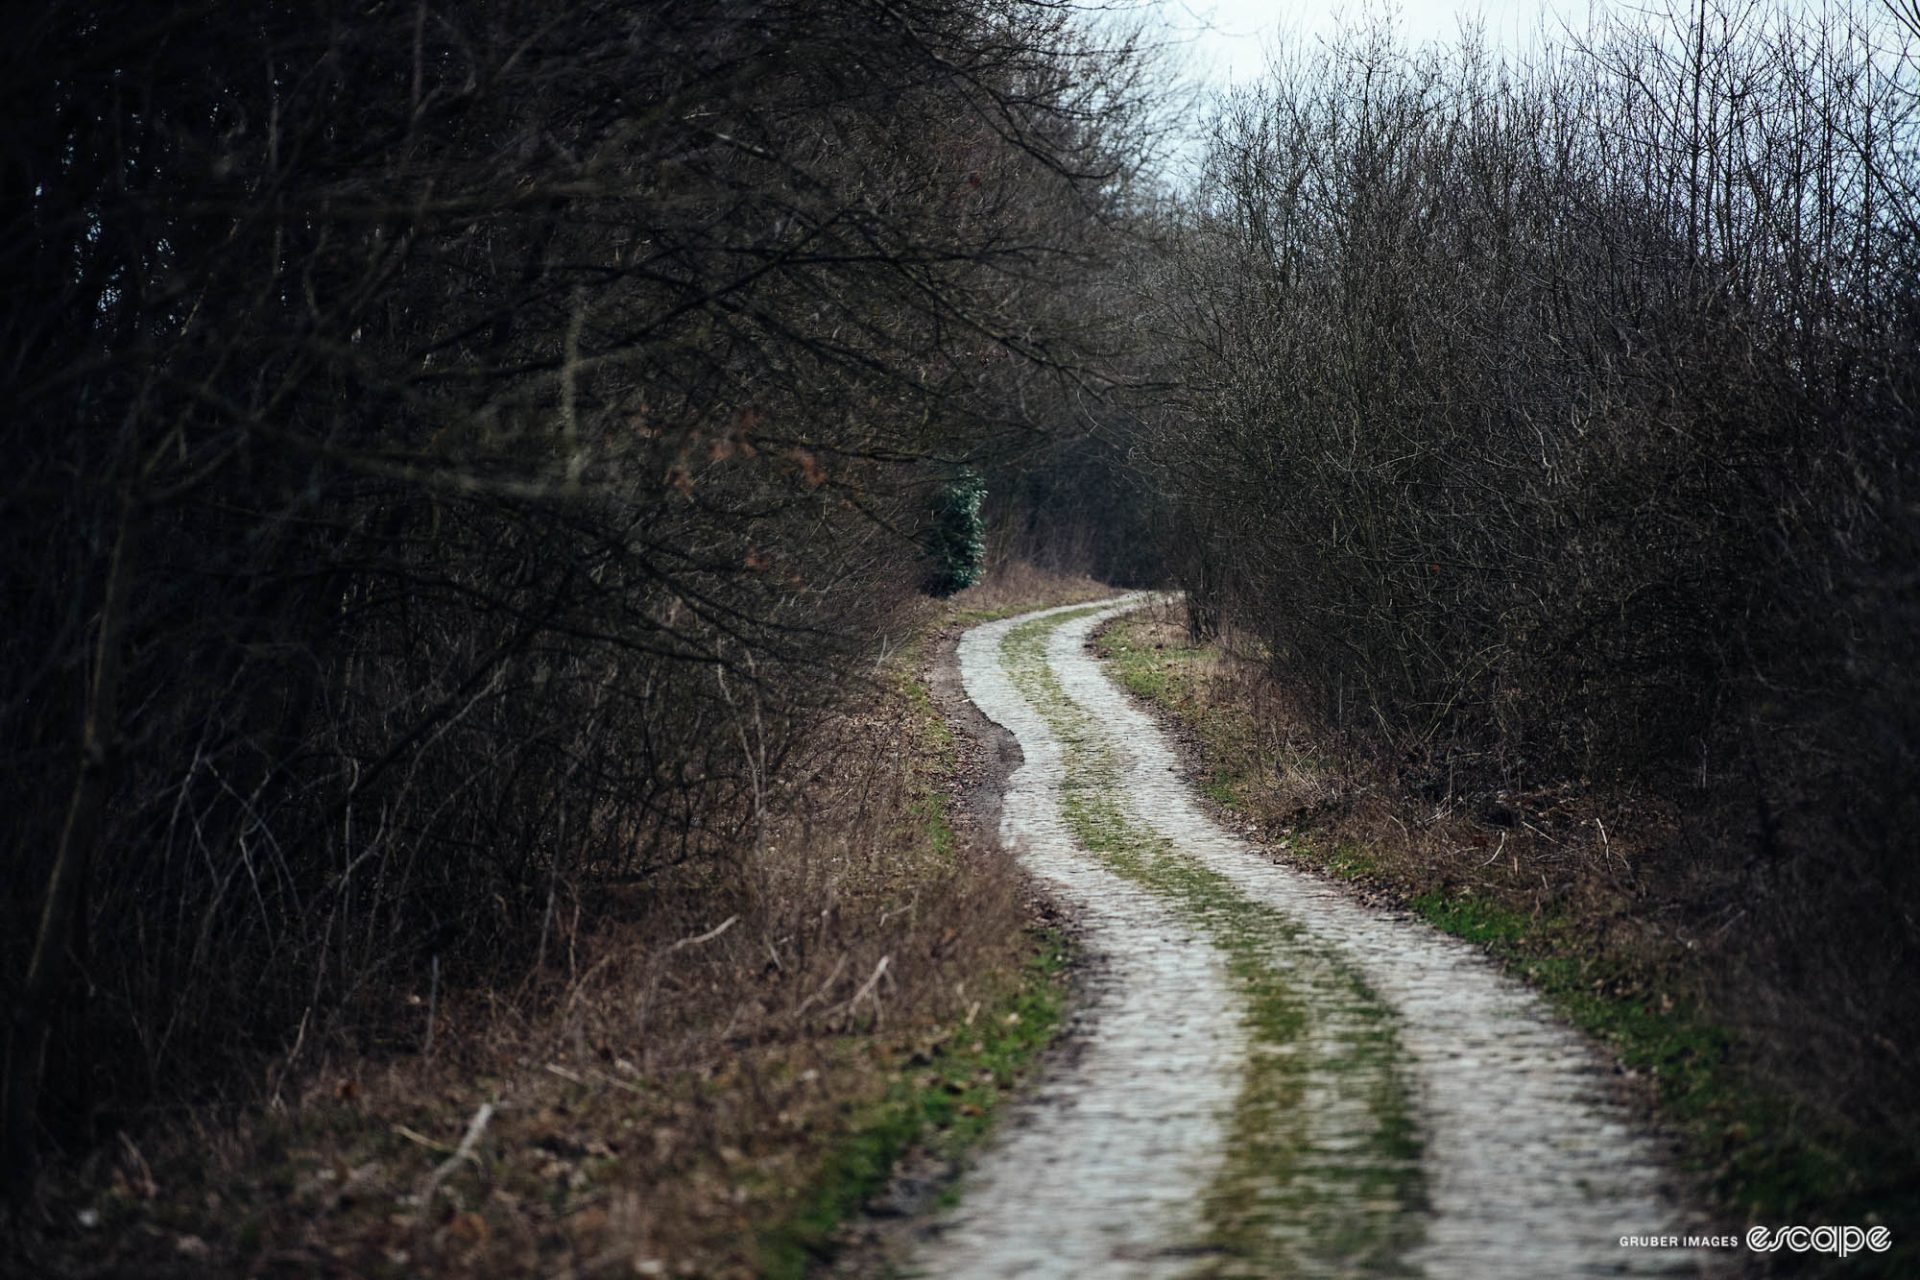 A deserted cobble road winds through a leafless thicket of trees.